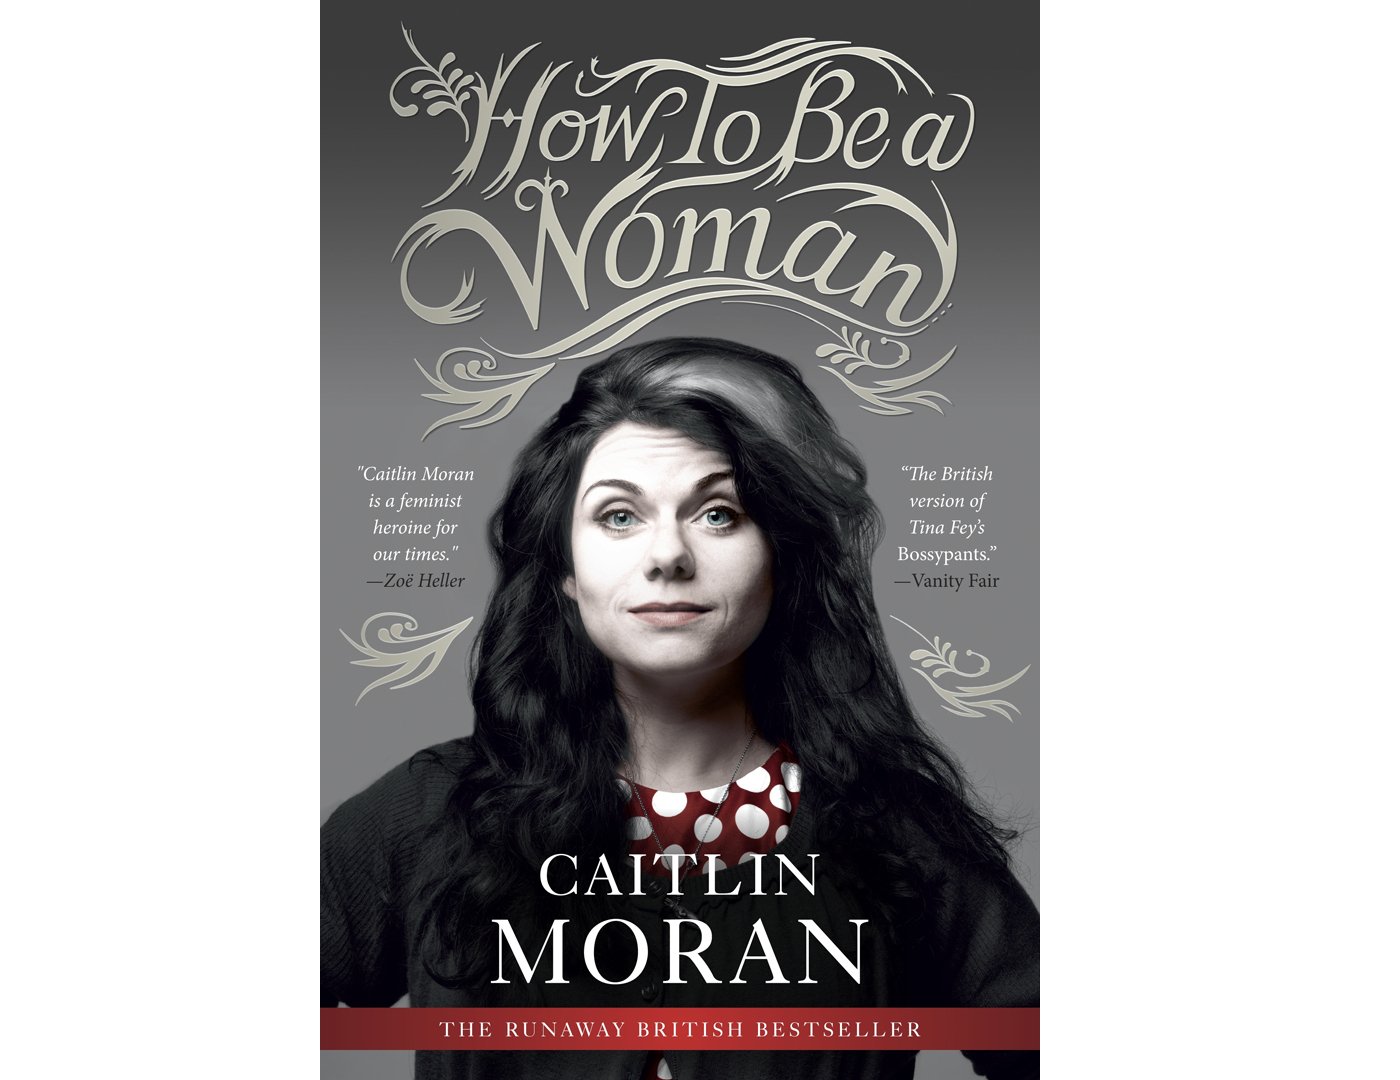 Caitlin Moran's How to Be a Woman book cover